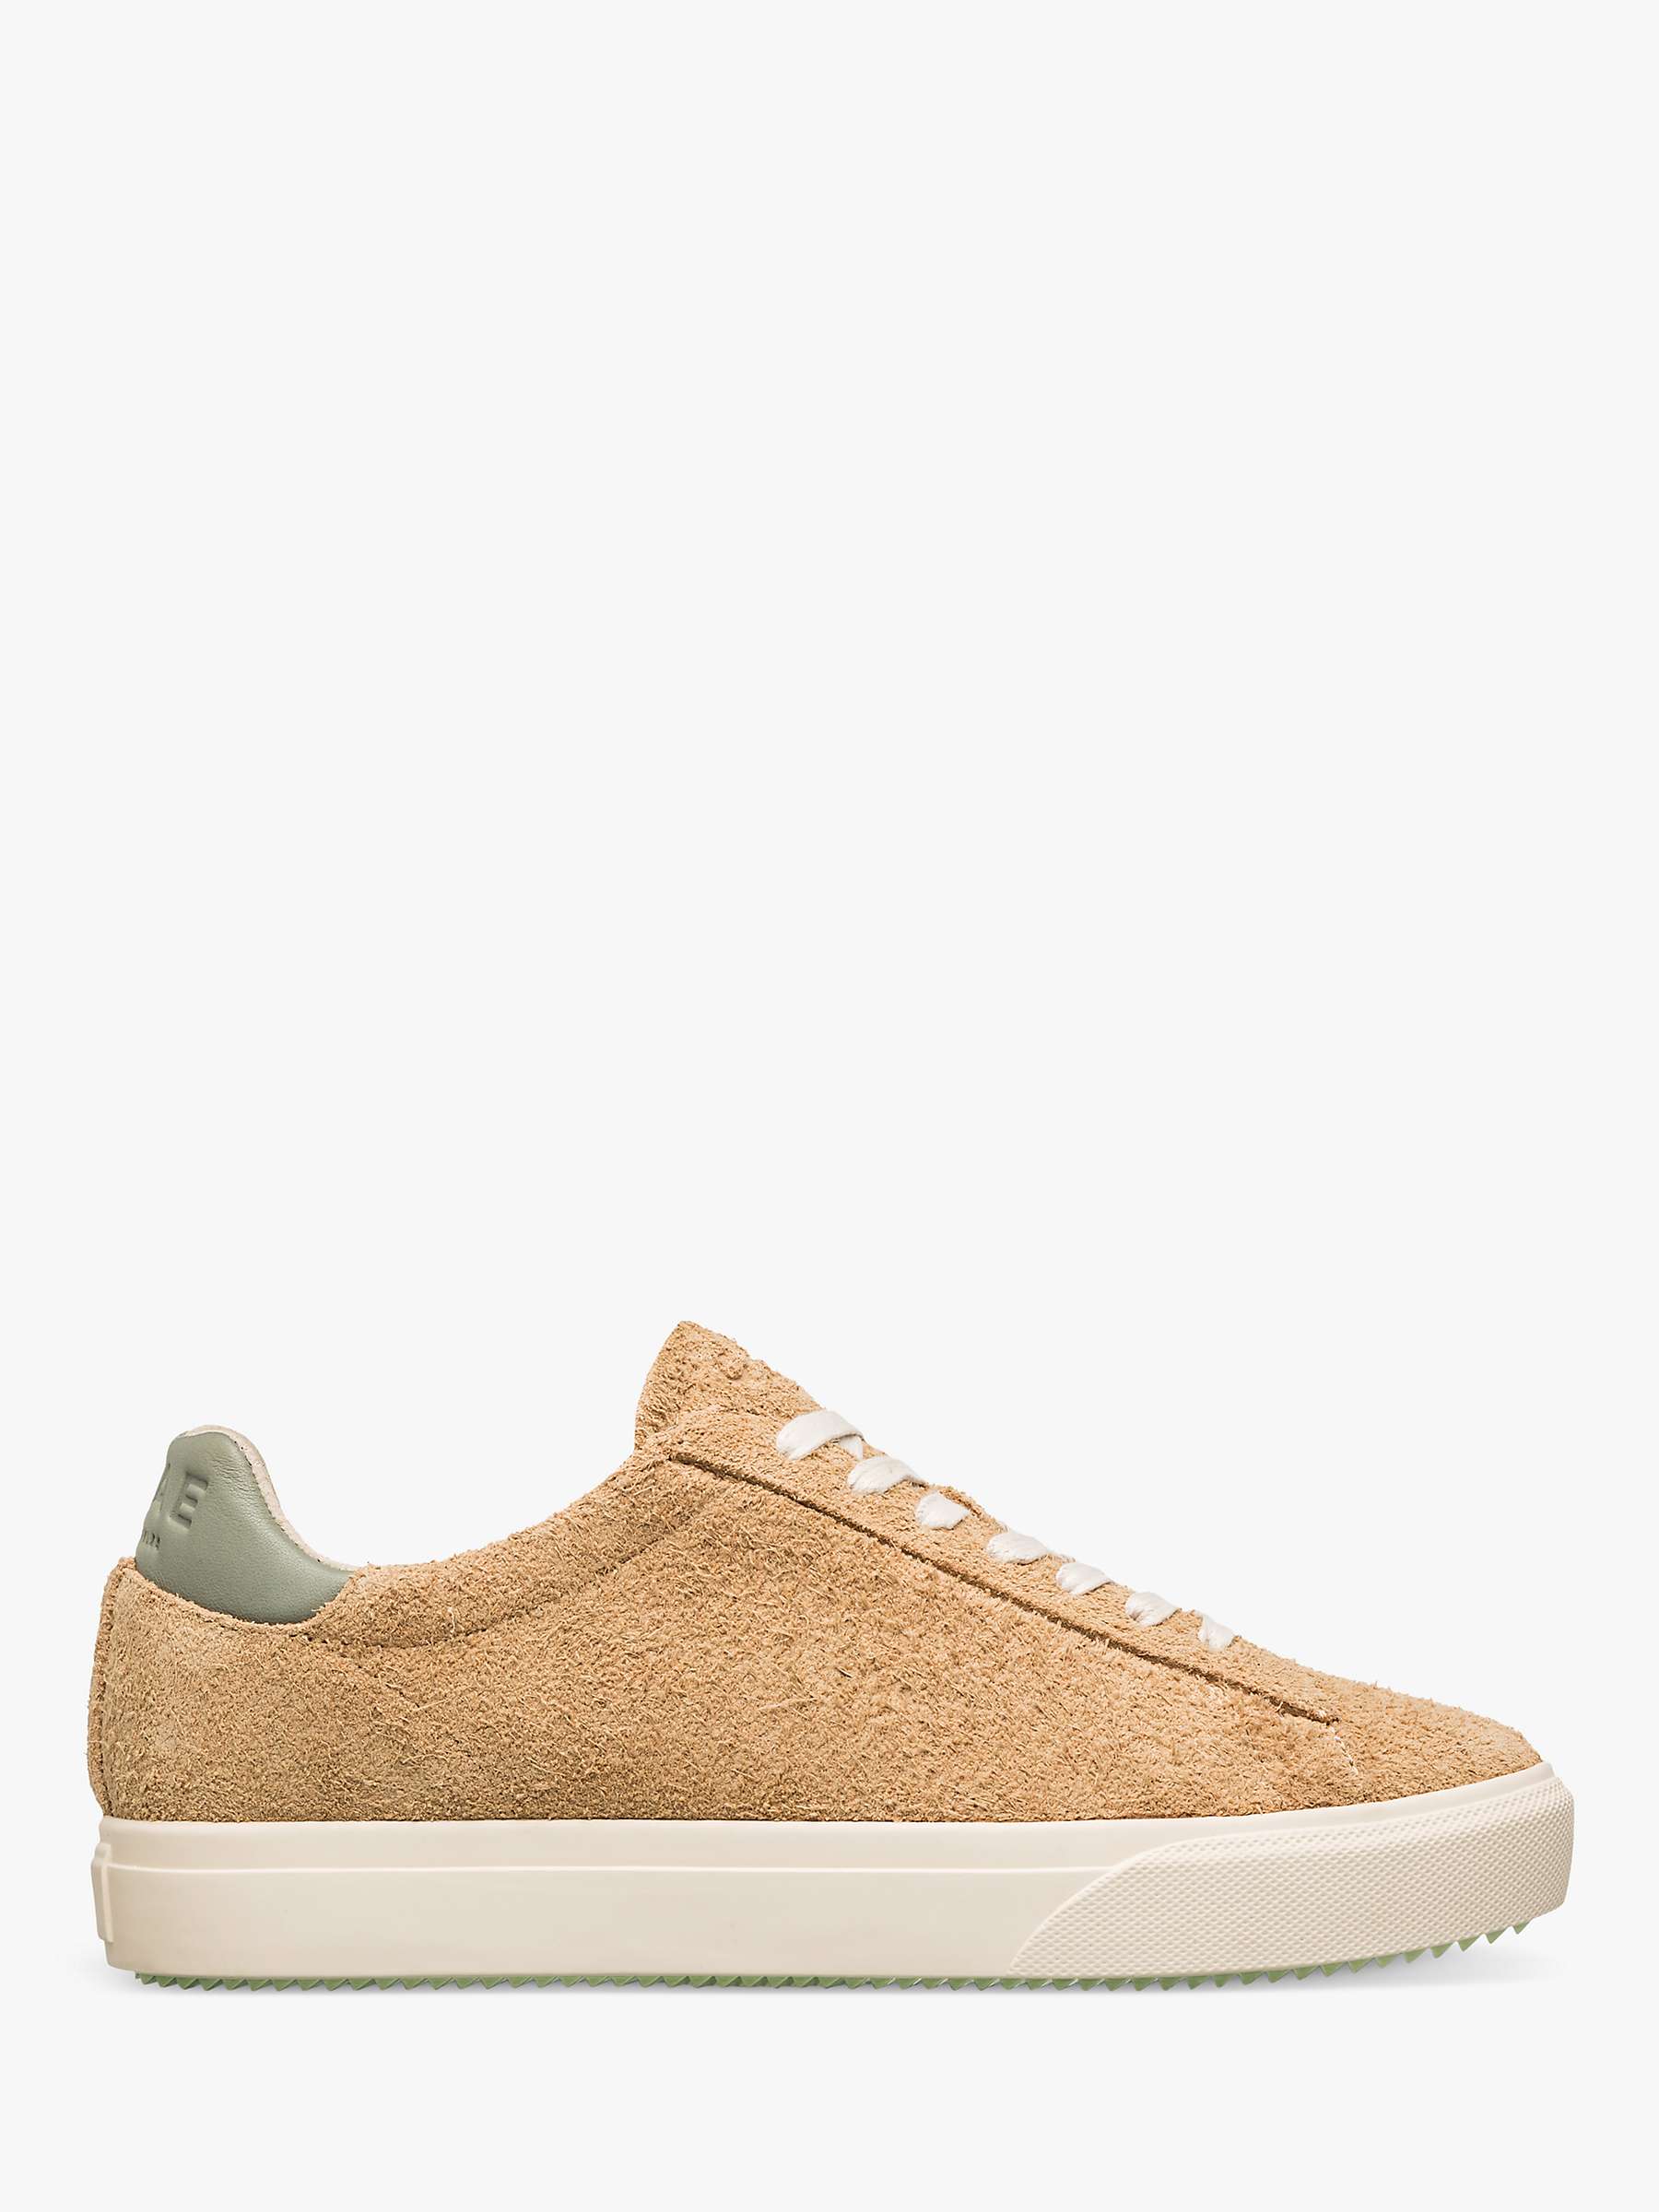 Buy CLAE Bradley Venice Suede Lace Up Trainers, Starfish/Tea Online at johnlewis.com